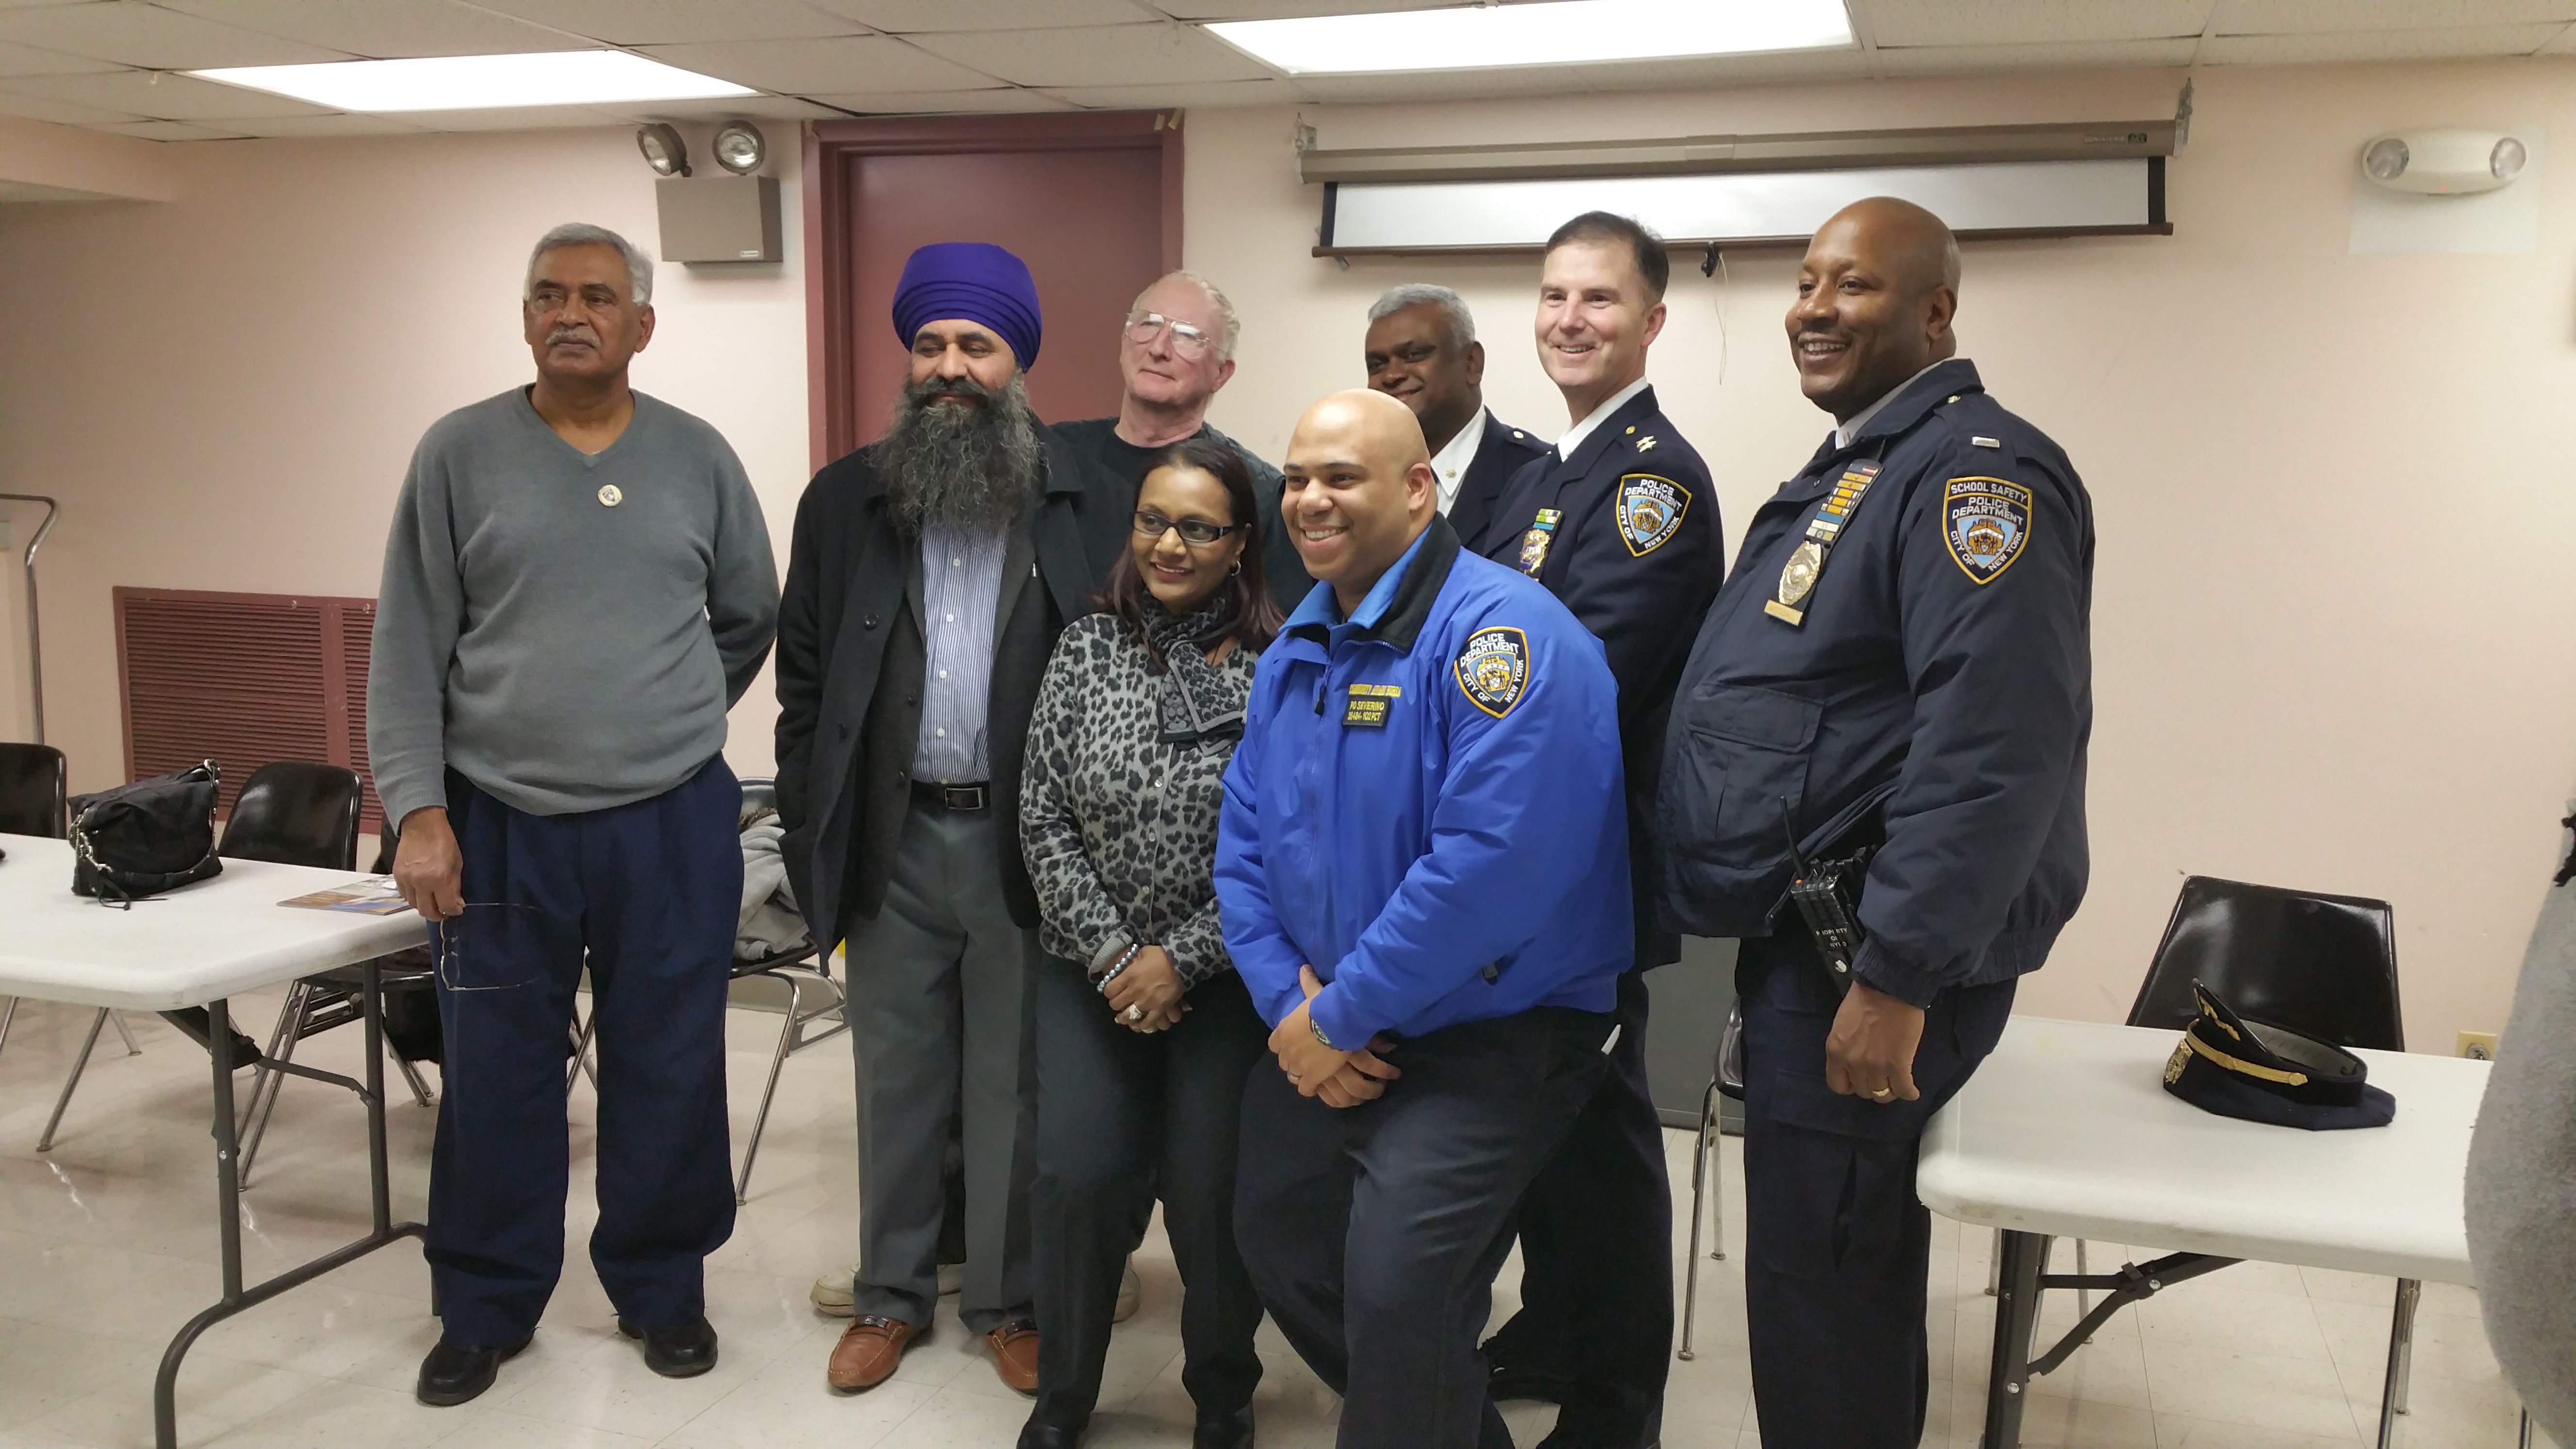 Members of the 102nd Precinct and the NYPD School Safety Division are pictured with the 102nd Precinct Community Council.